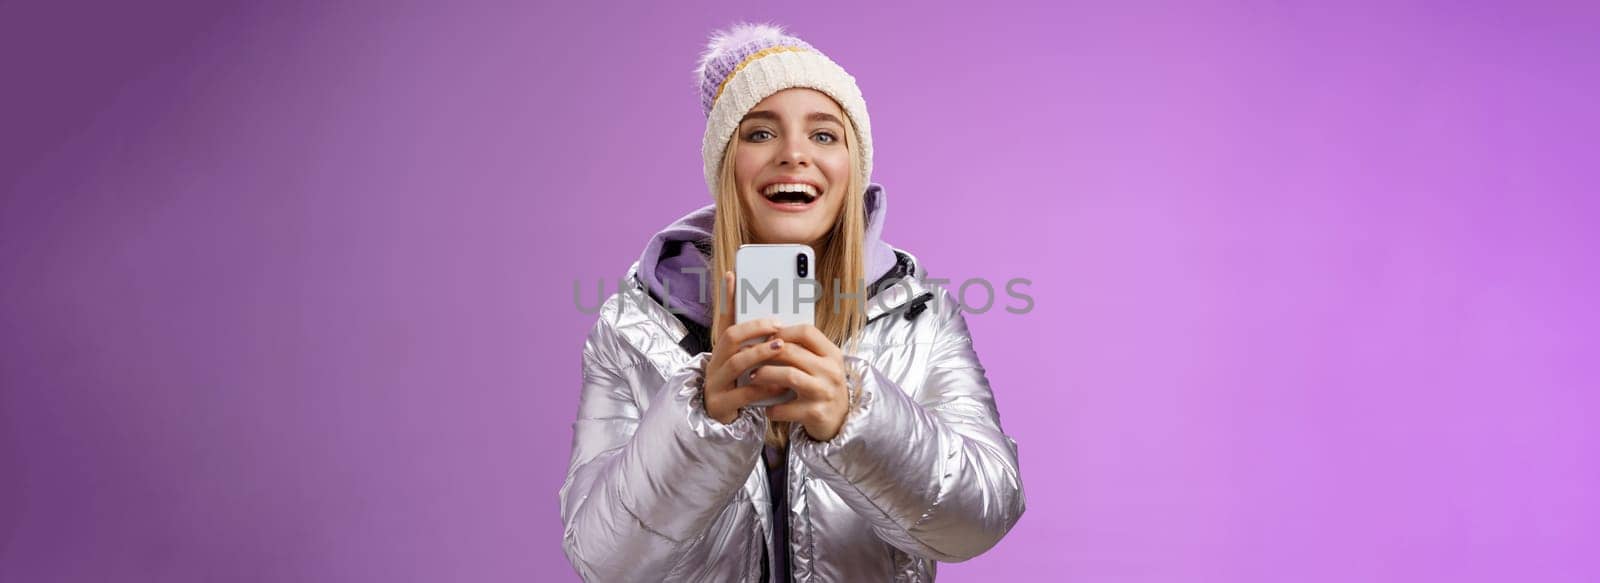 Amused excited attractive blond girlfriend holding smartphone up recording video boyfriend step snowboard first time capturing memories mobile camera standing happily purple background.